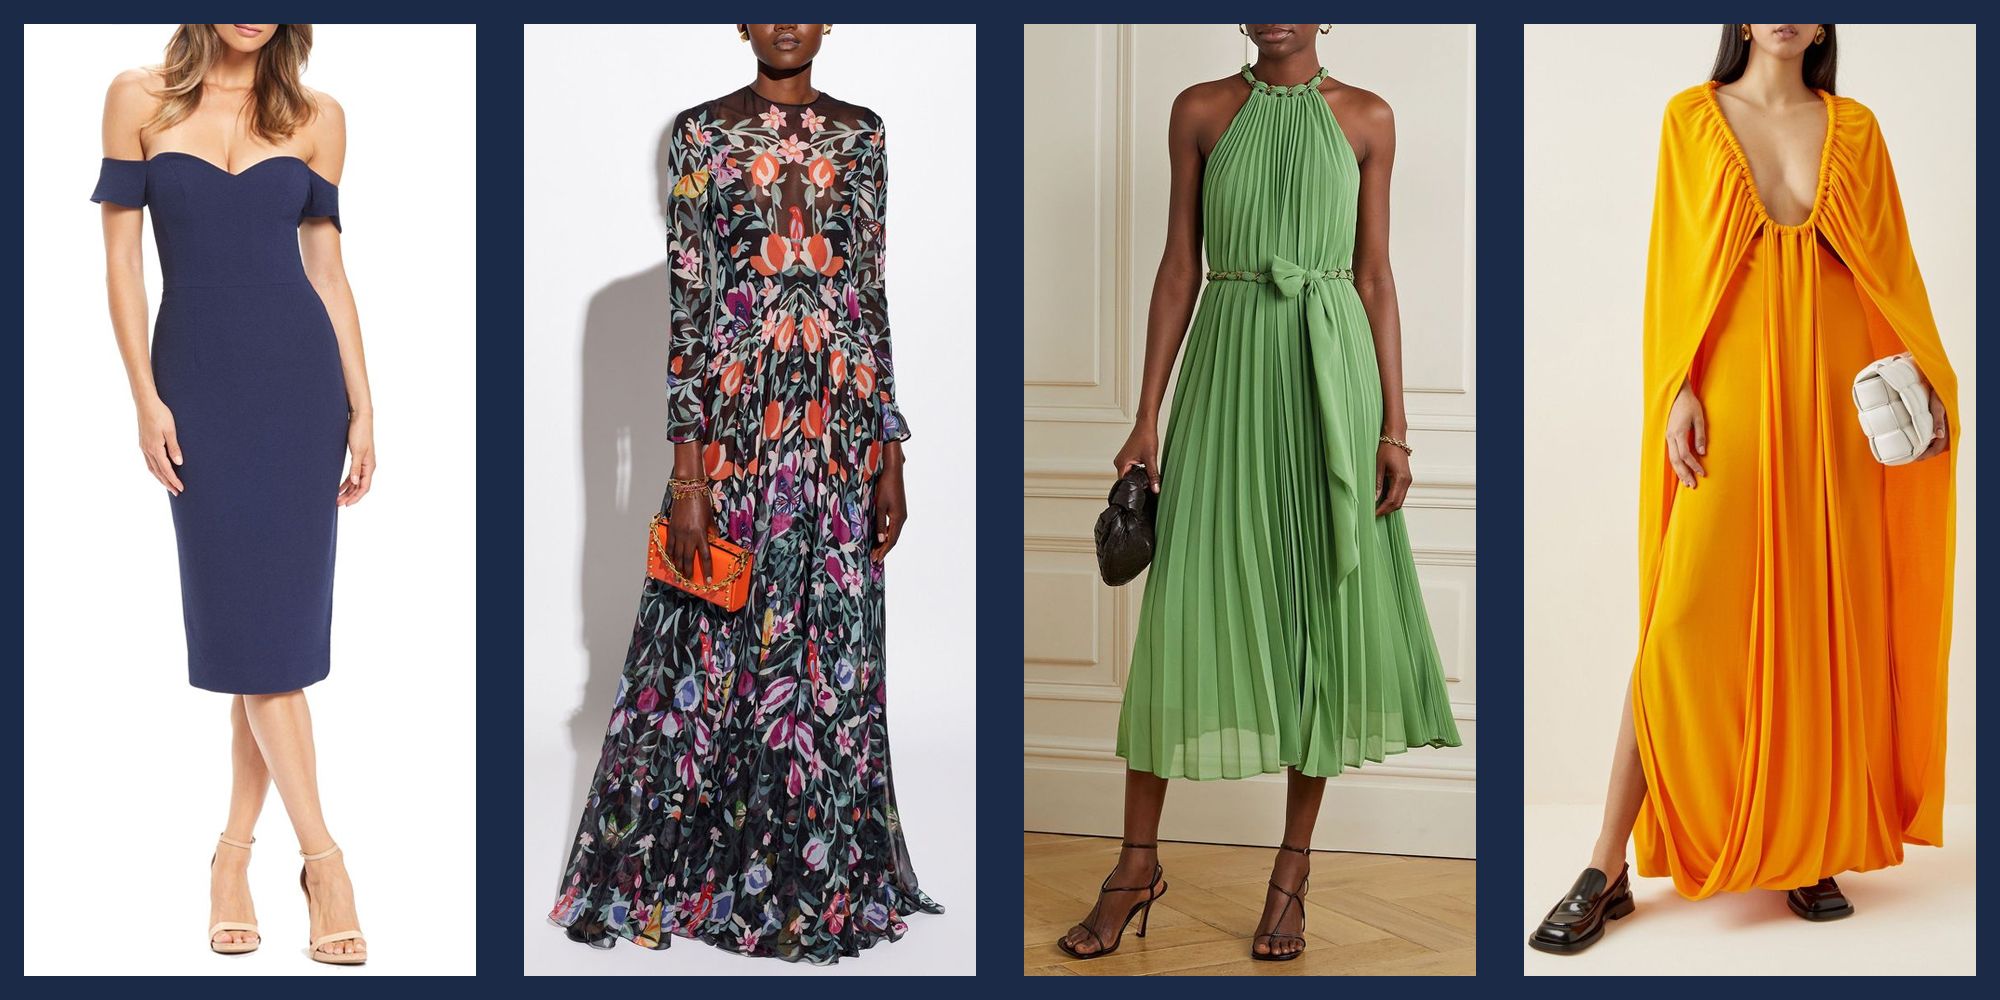 25 Chic Spring Wedding Guest Dresses ...